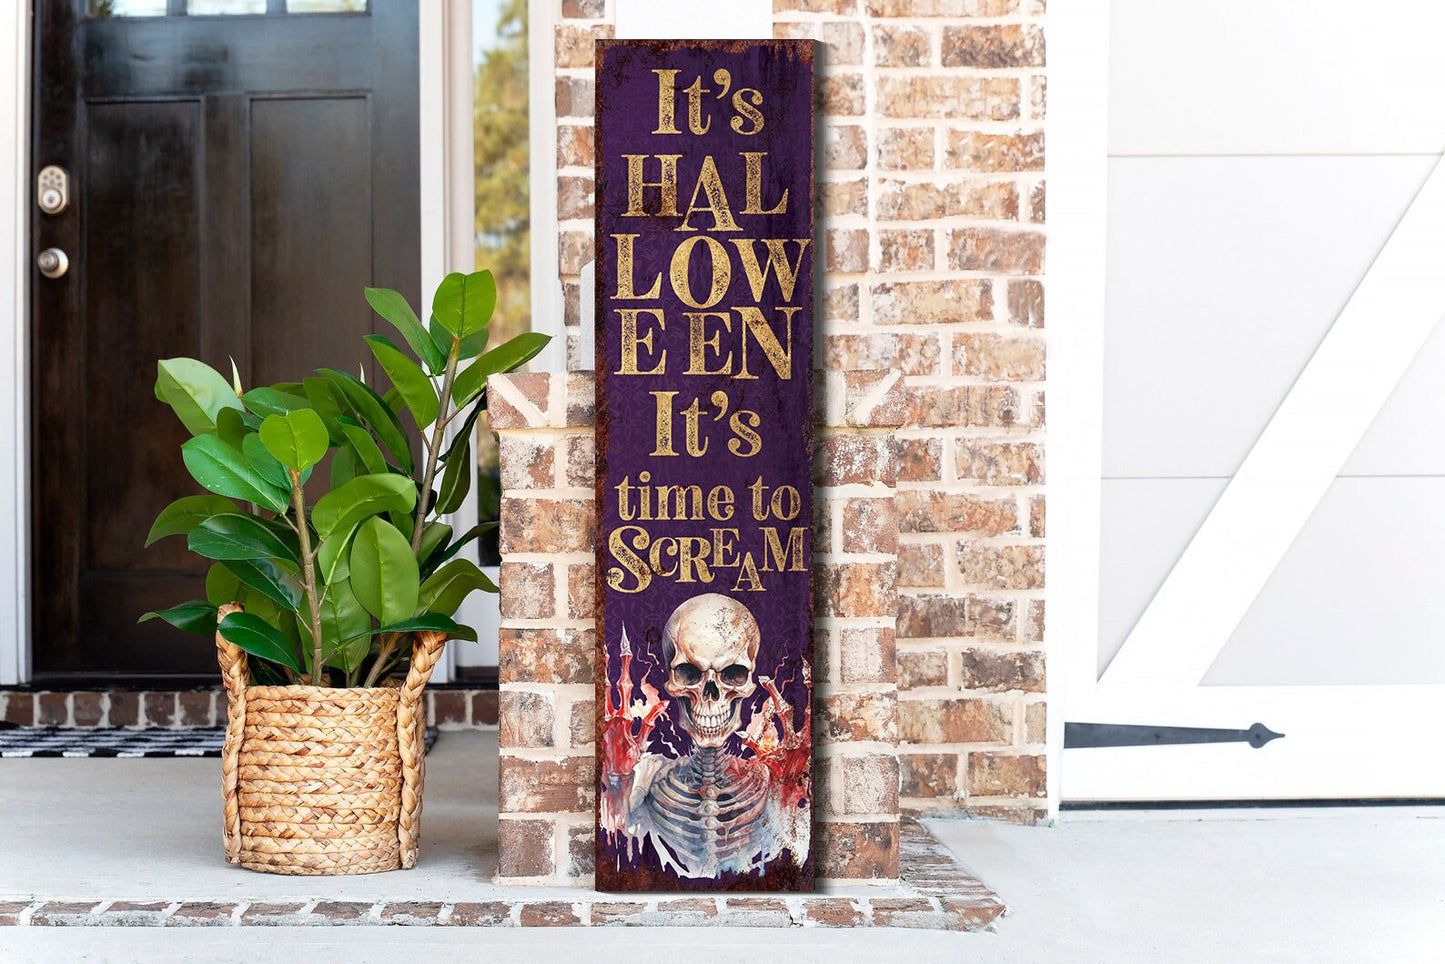 36in "It's Halloween, It's Time to Scream" Porch Sign - Front Porch Halloween Welcome Sign, Vintage Halloween Decoration